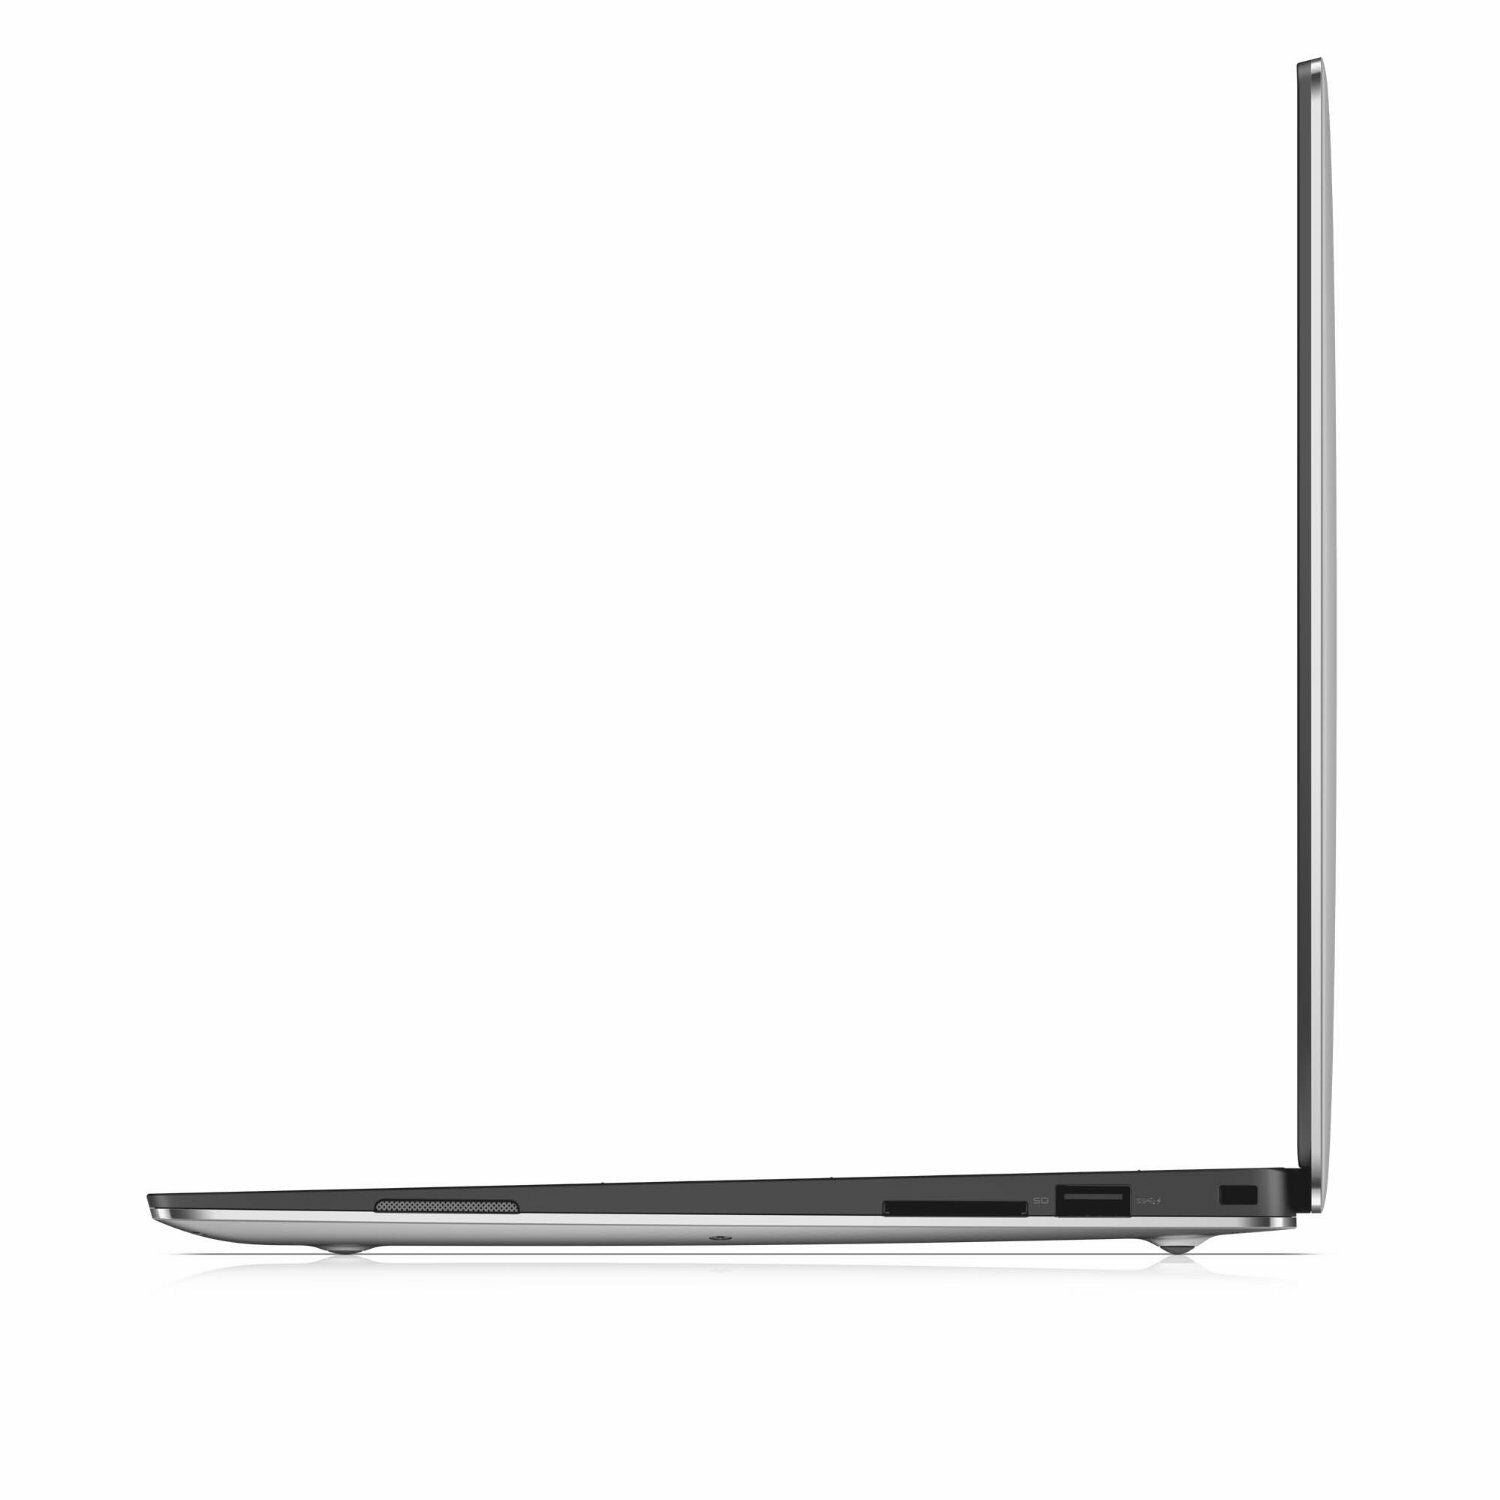 Dell XPS 15" Touch Screen Laptop Core i5-6300HQ 2.3GHz 8GB RAM 119GB SSD, Silver